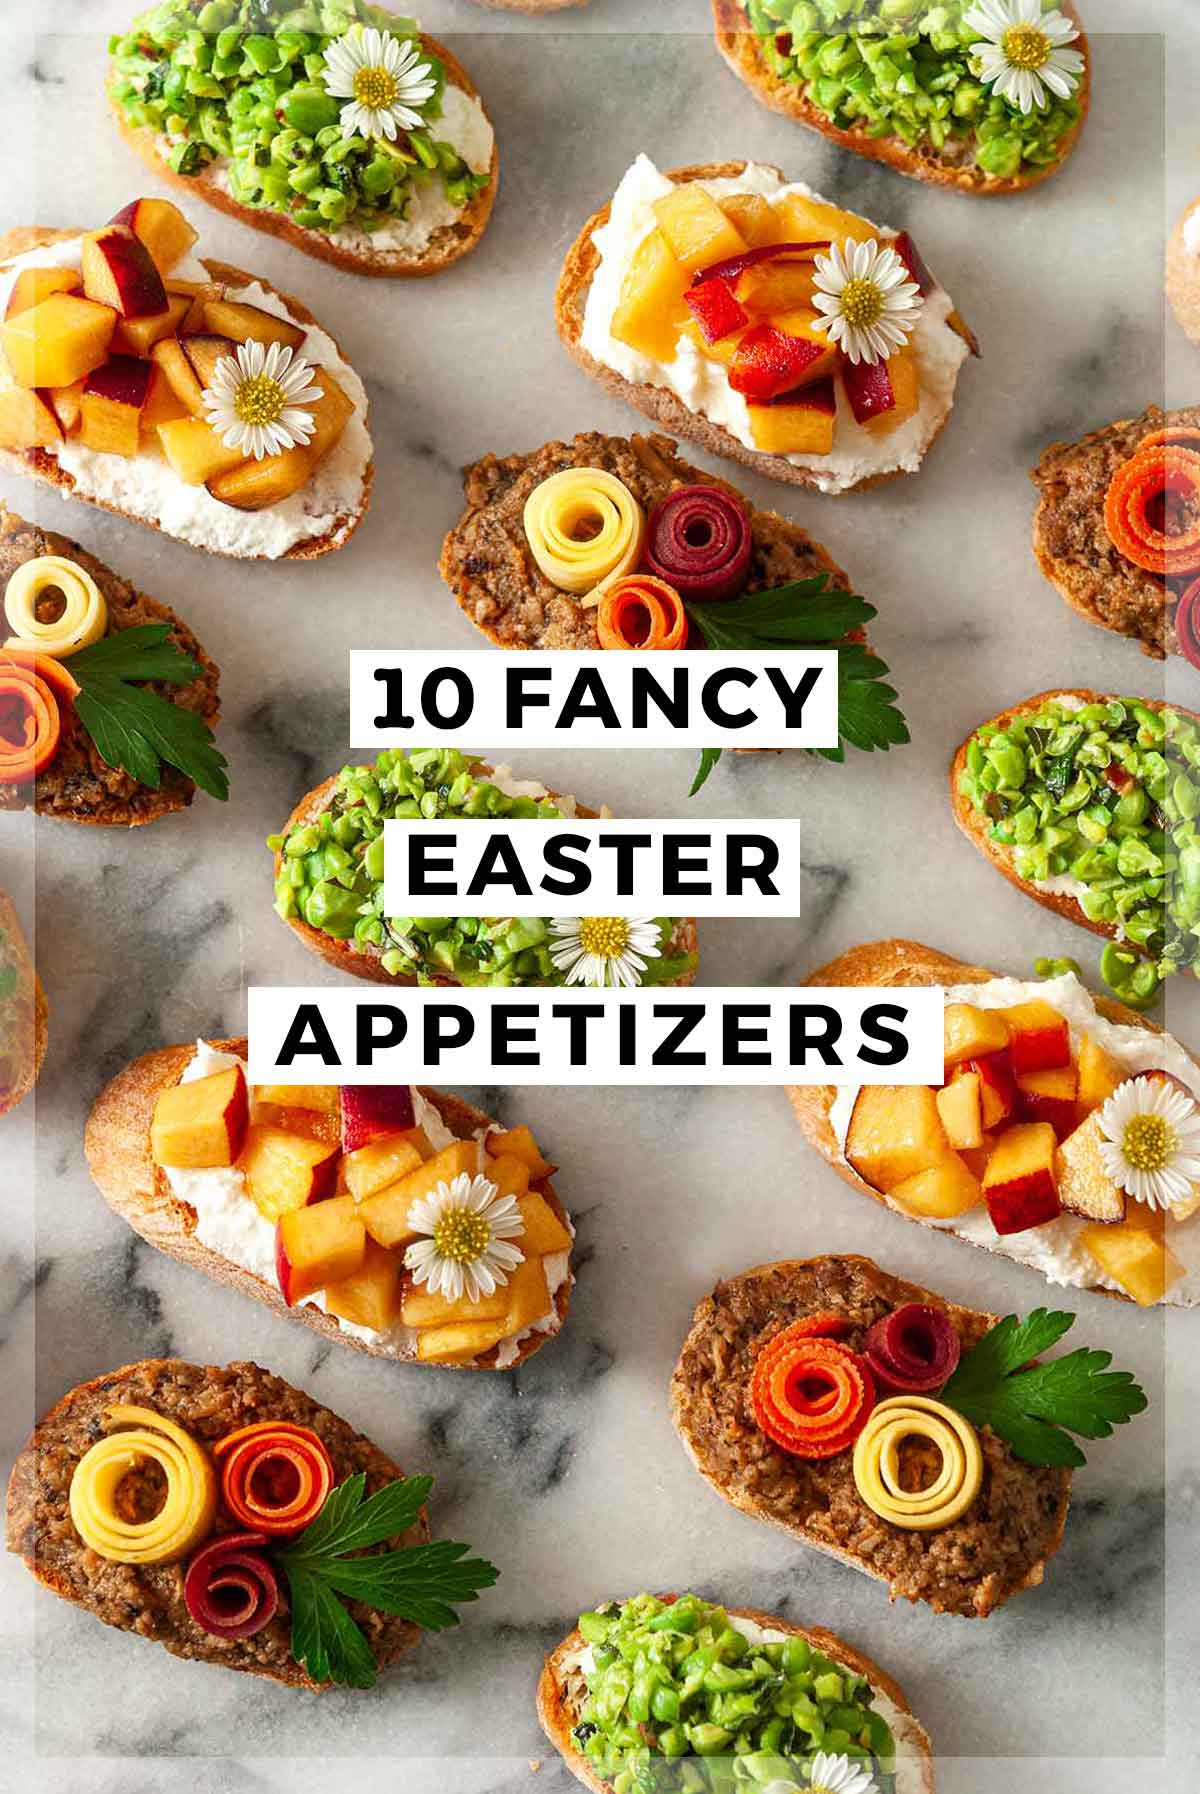 Garnished crostini on marble with a title that says "10 Fancy Easter Appetizers."